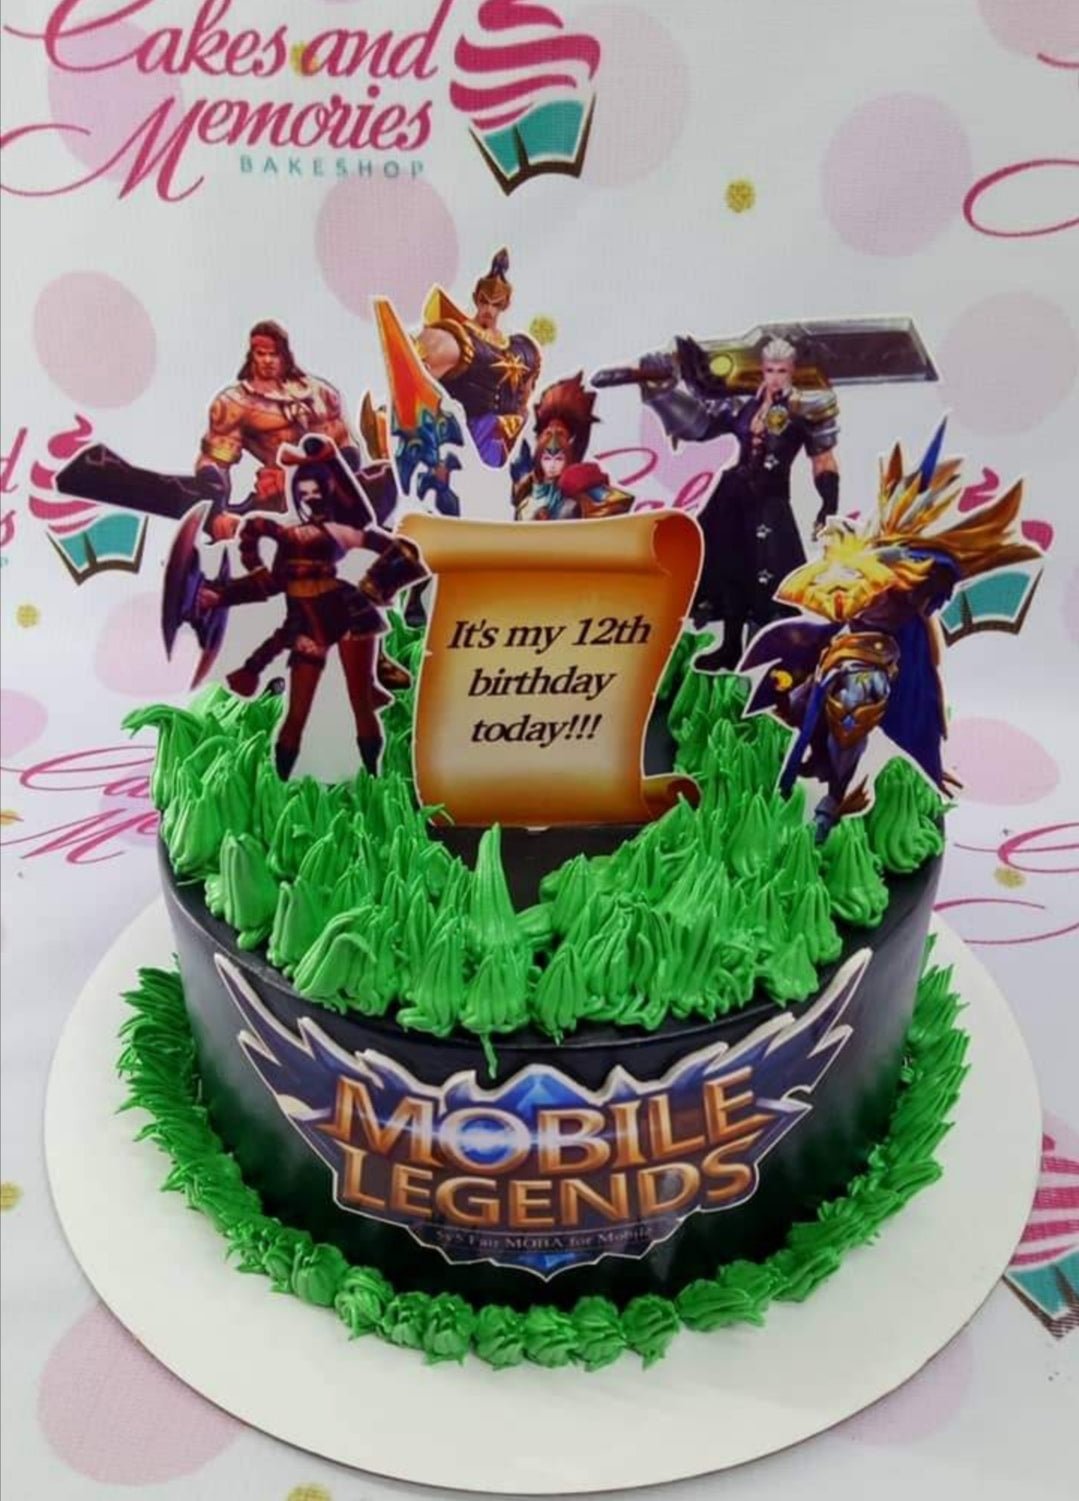 Mobile Legends Cake - 1118 – Cakes and Memories Bakeshop